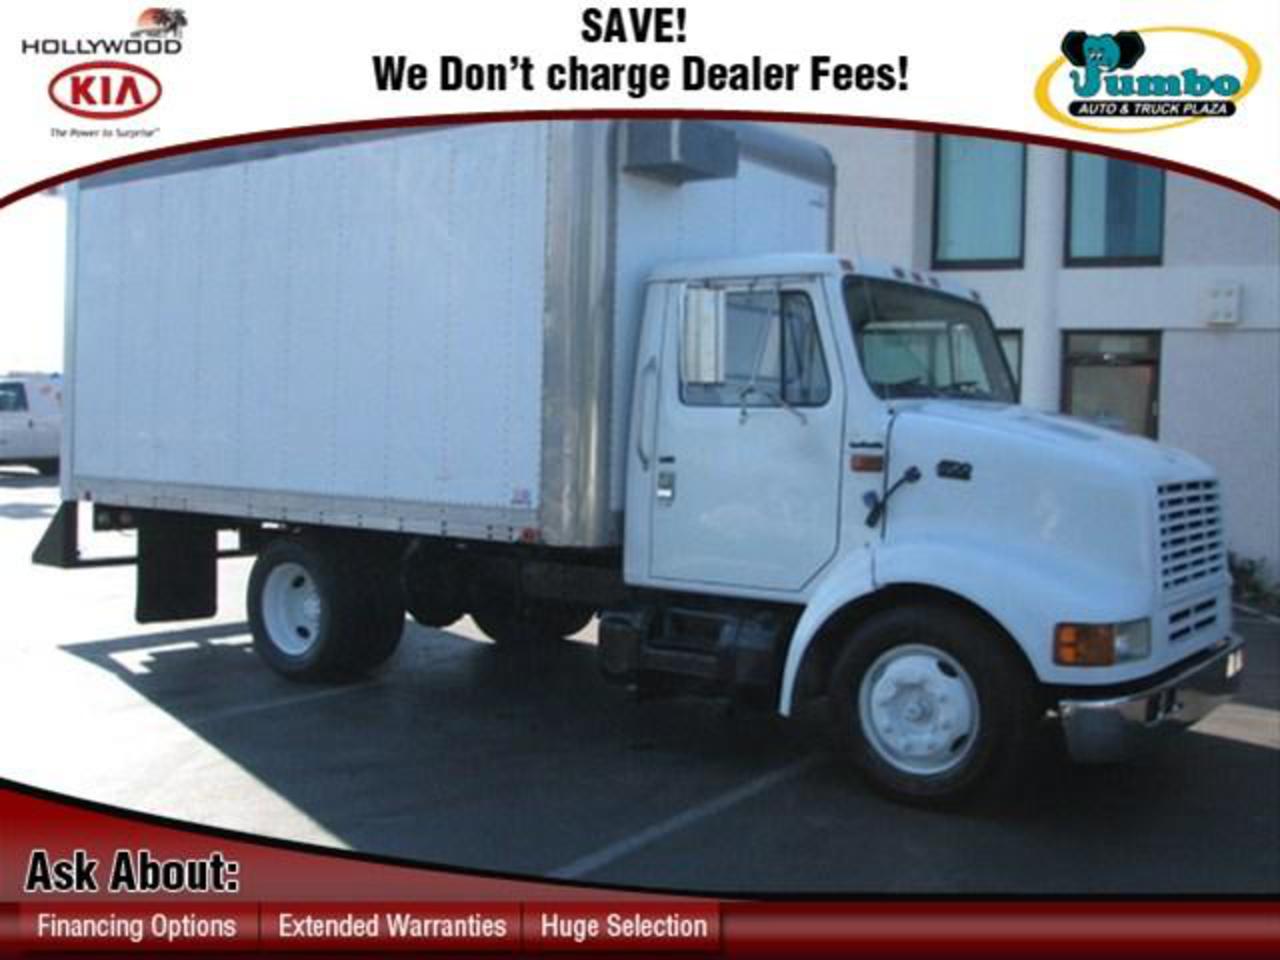 1995 International 4500/4700 LPX, Used Cars For Sale - Carsforsale.